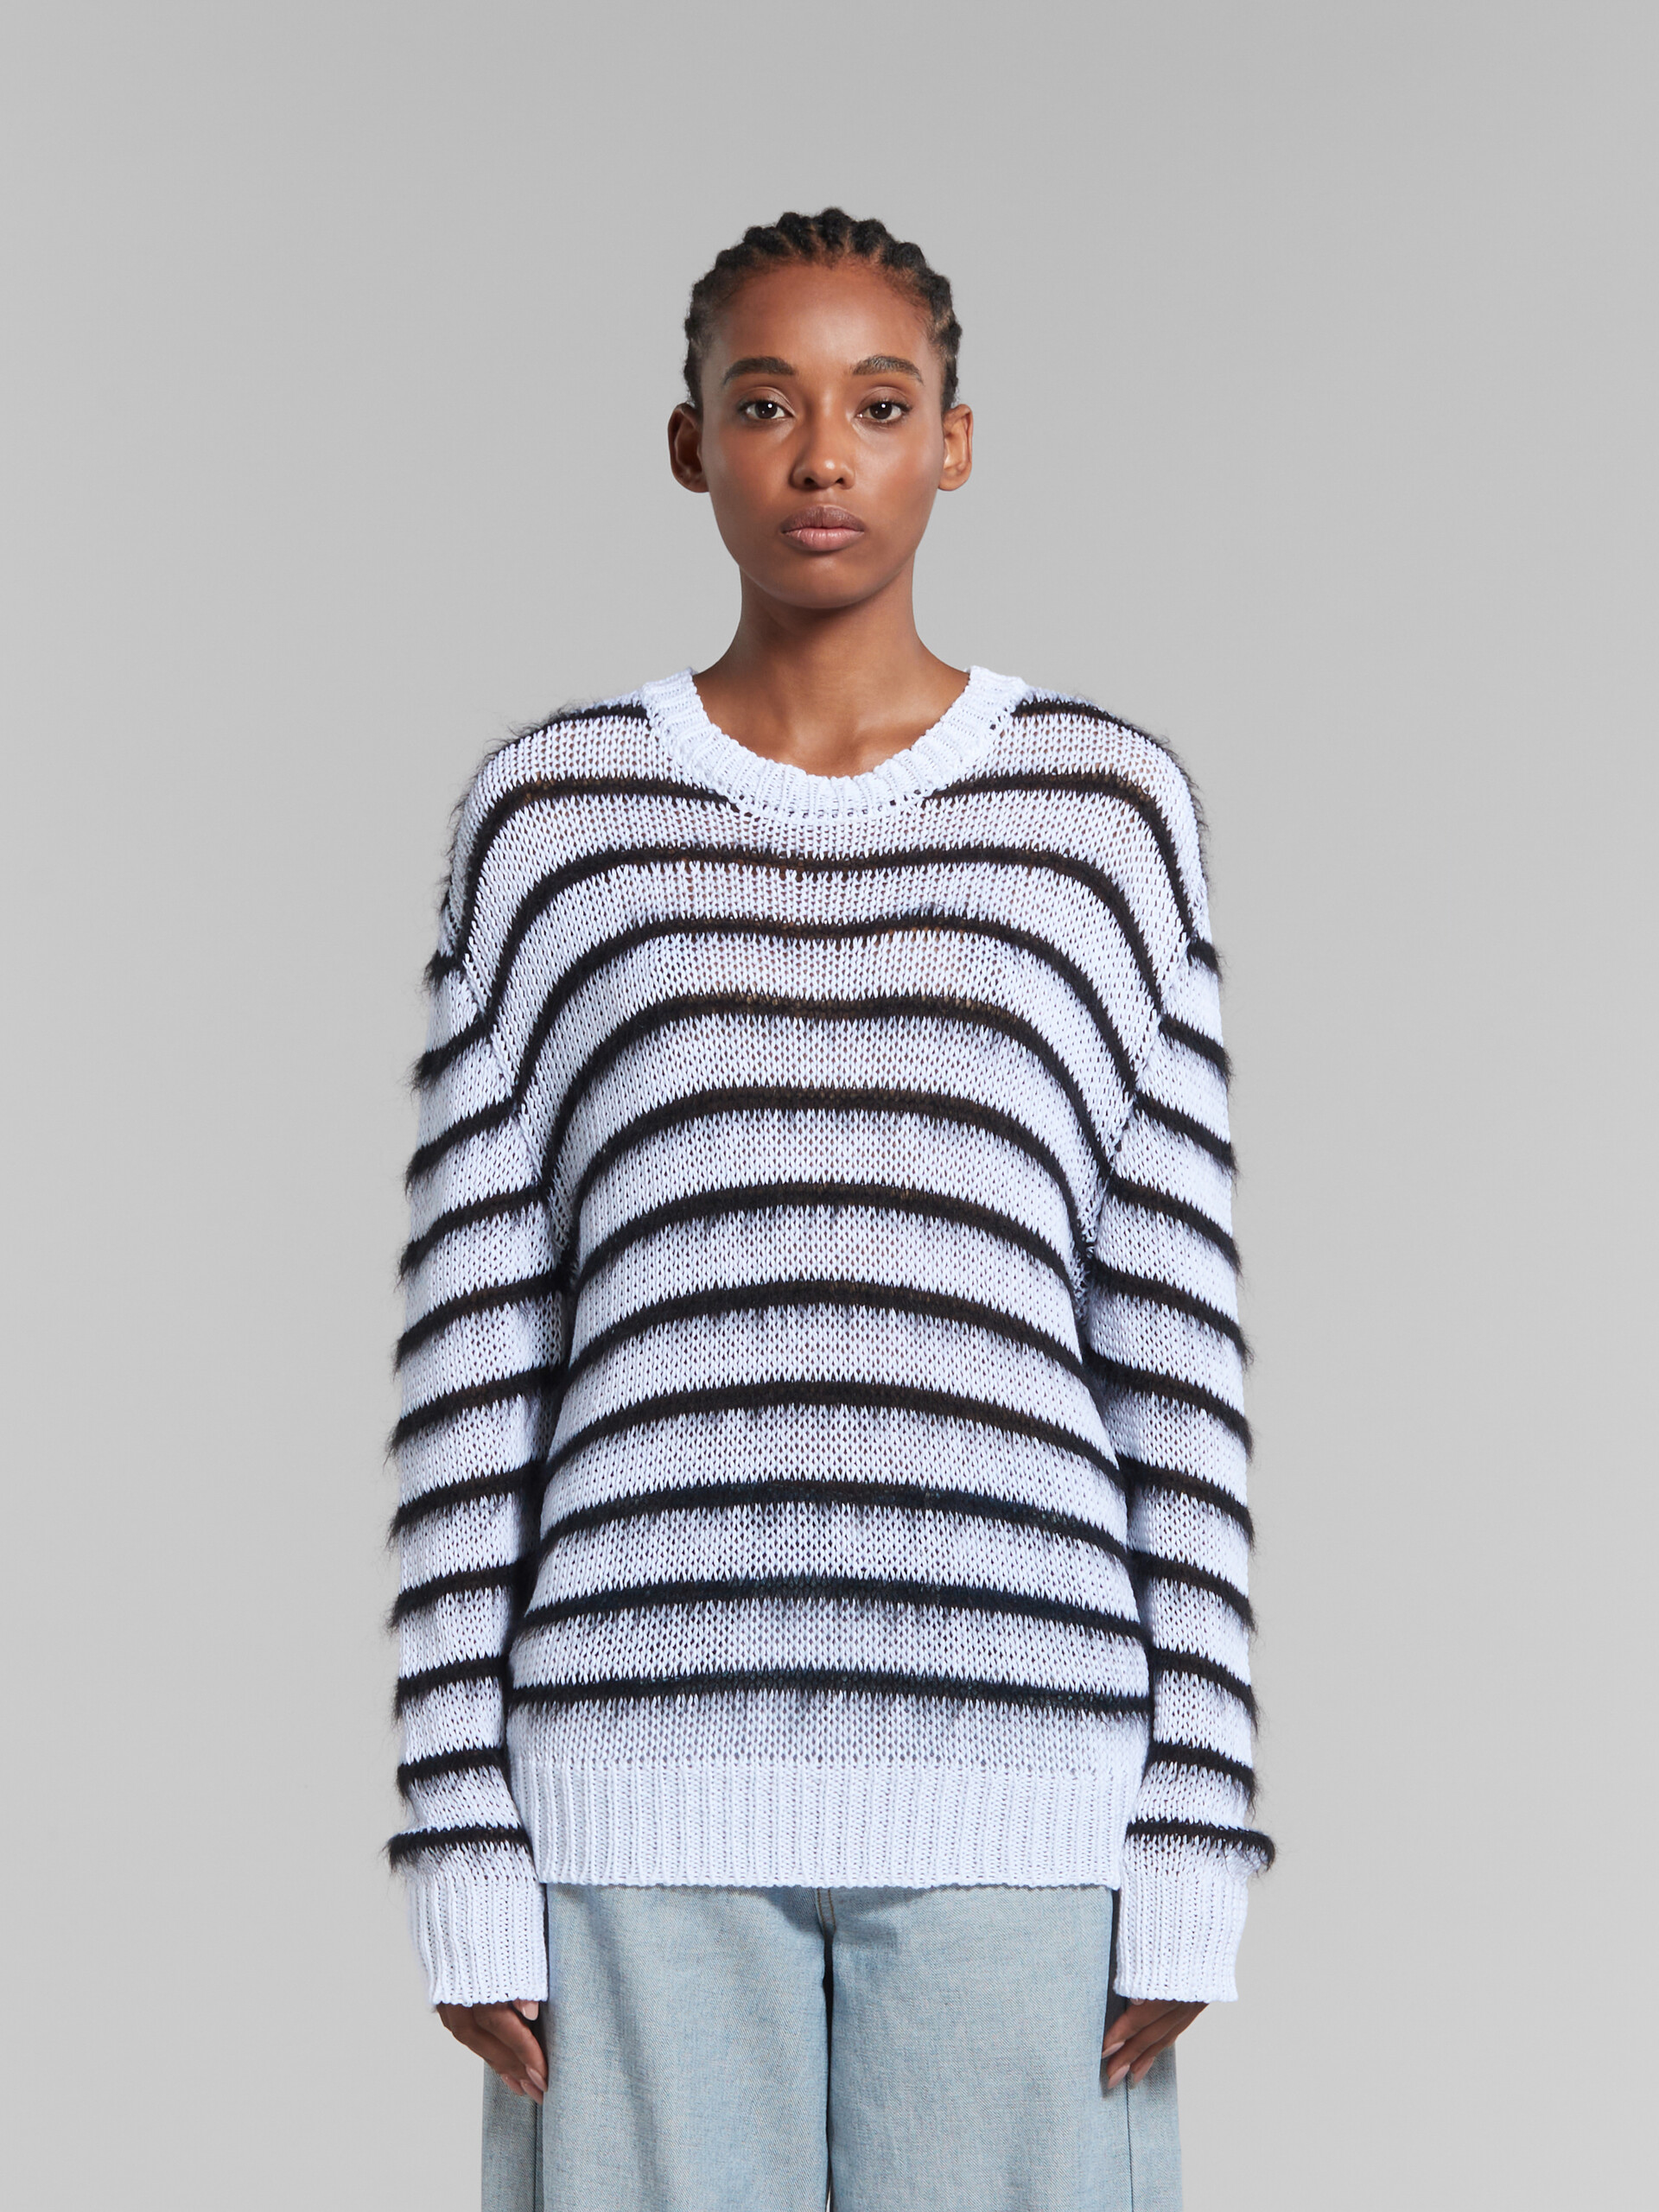 White jumper with black mohair stripes - Pullovers - Image 2